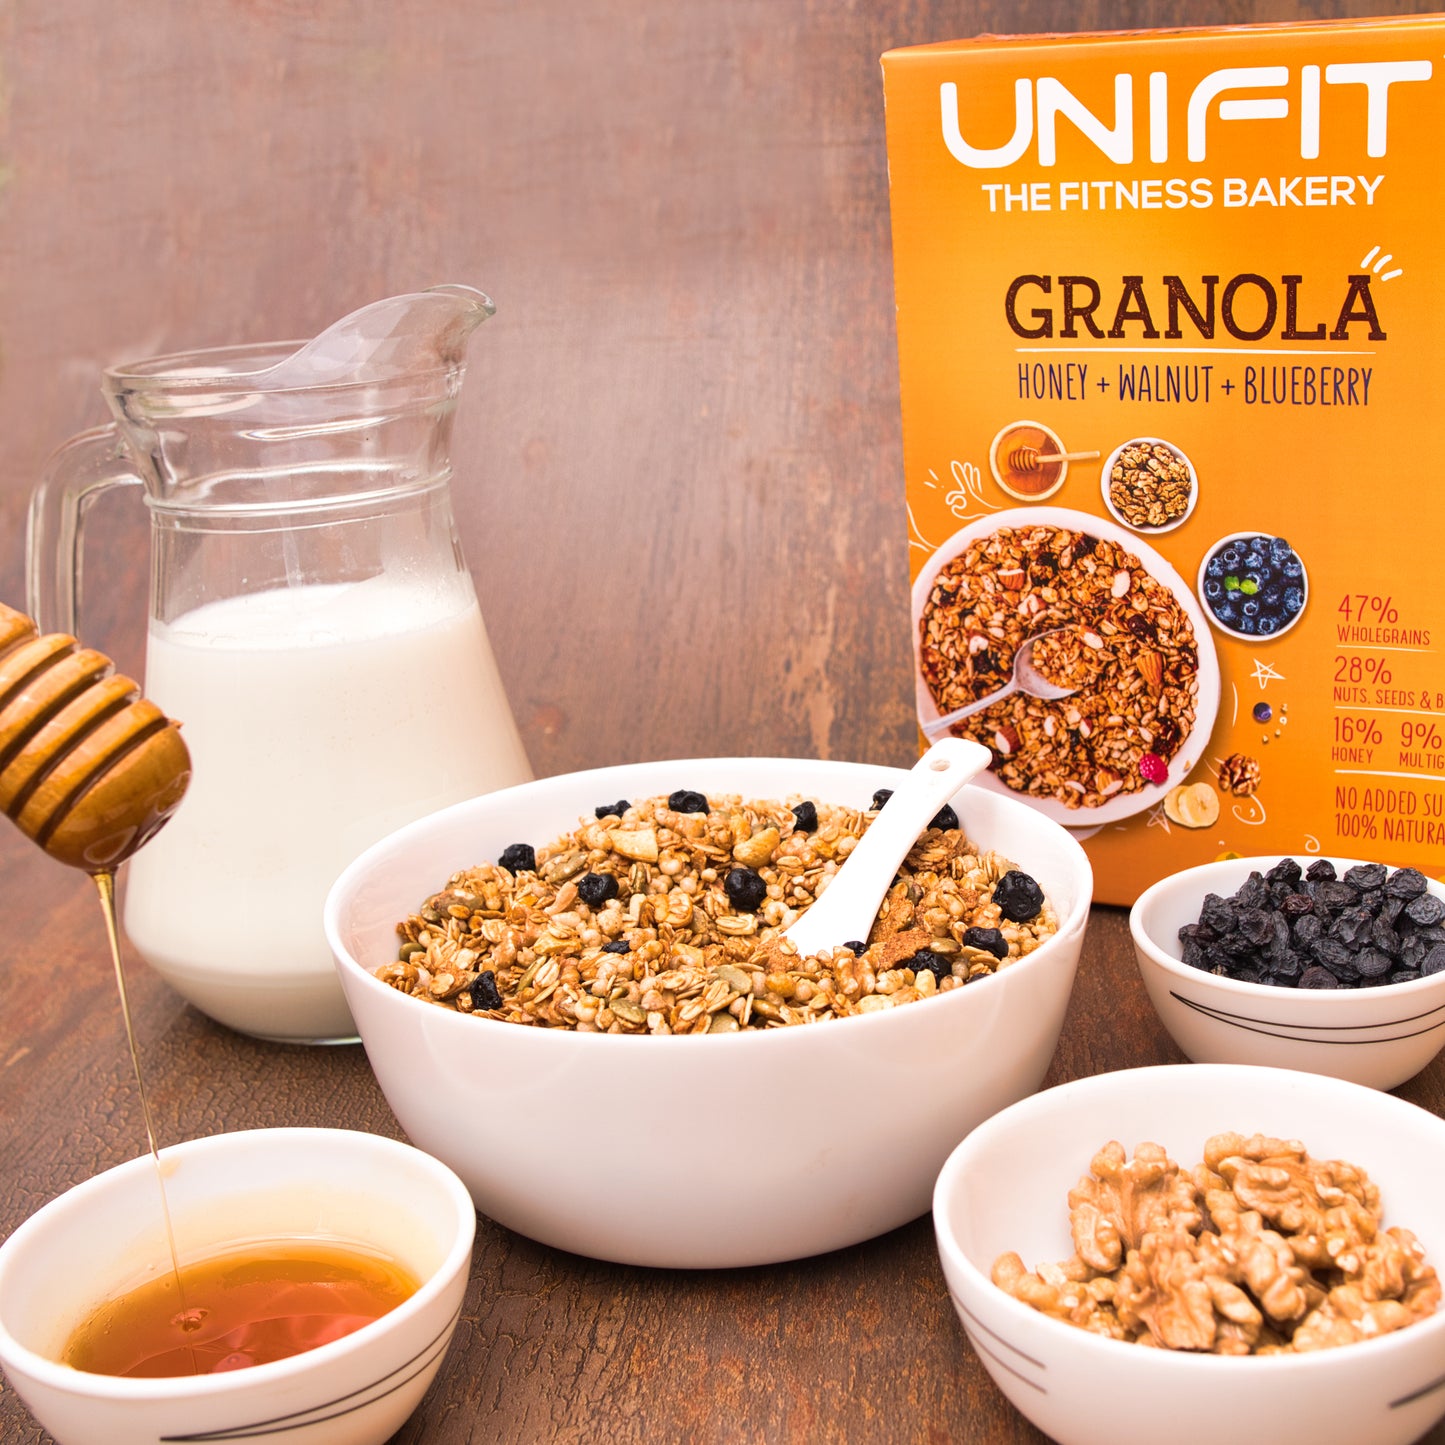 UNIFIT Instant Baked Crunchy Granola: A Quick, Nutritious Breakfast Delight.